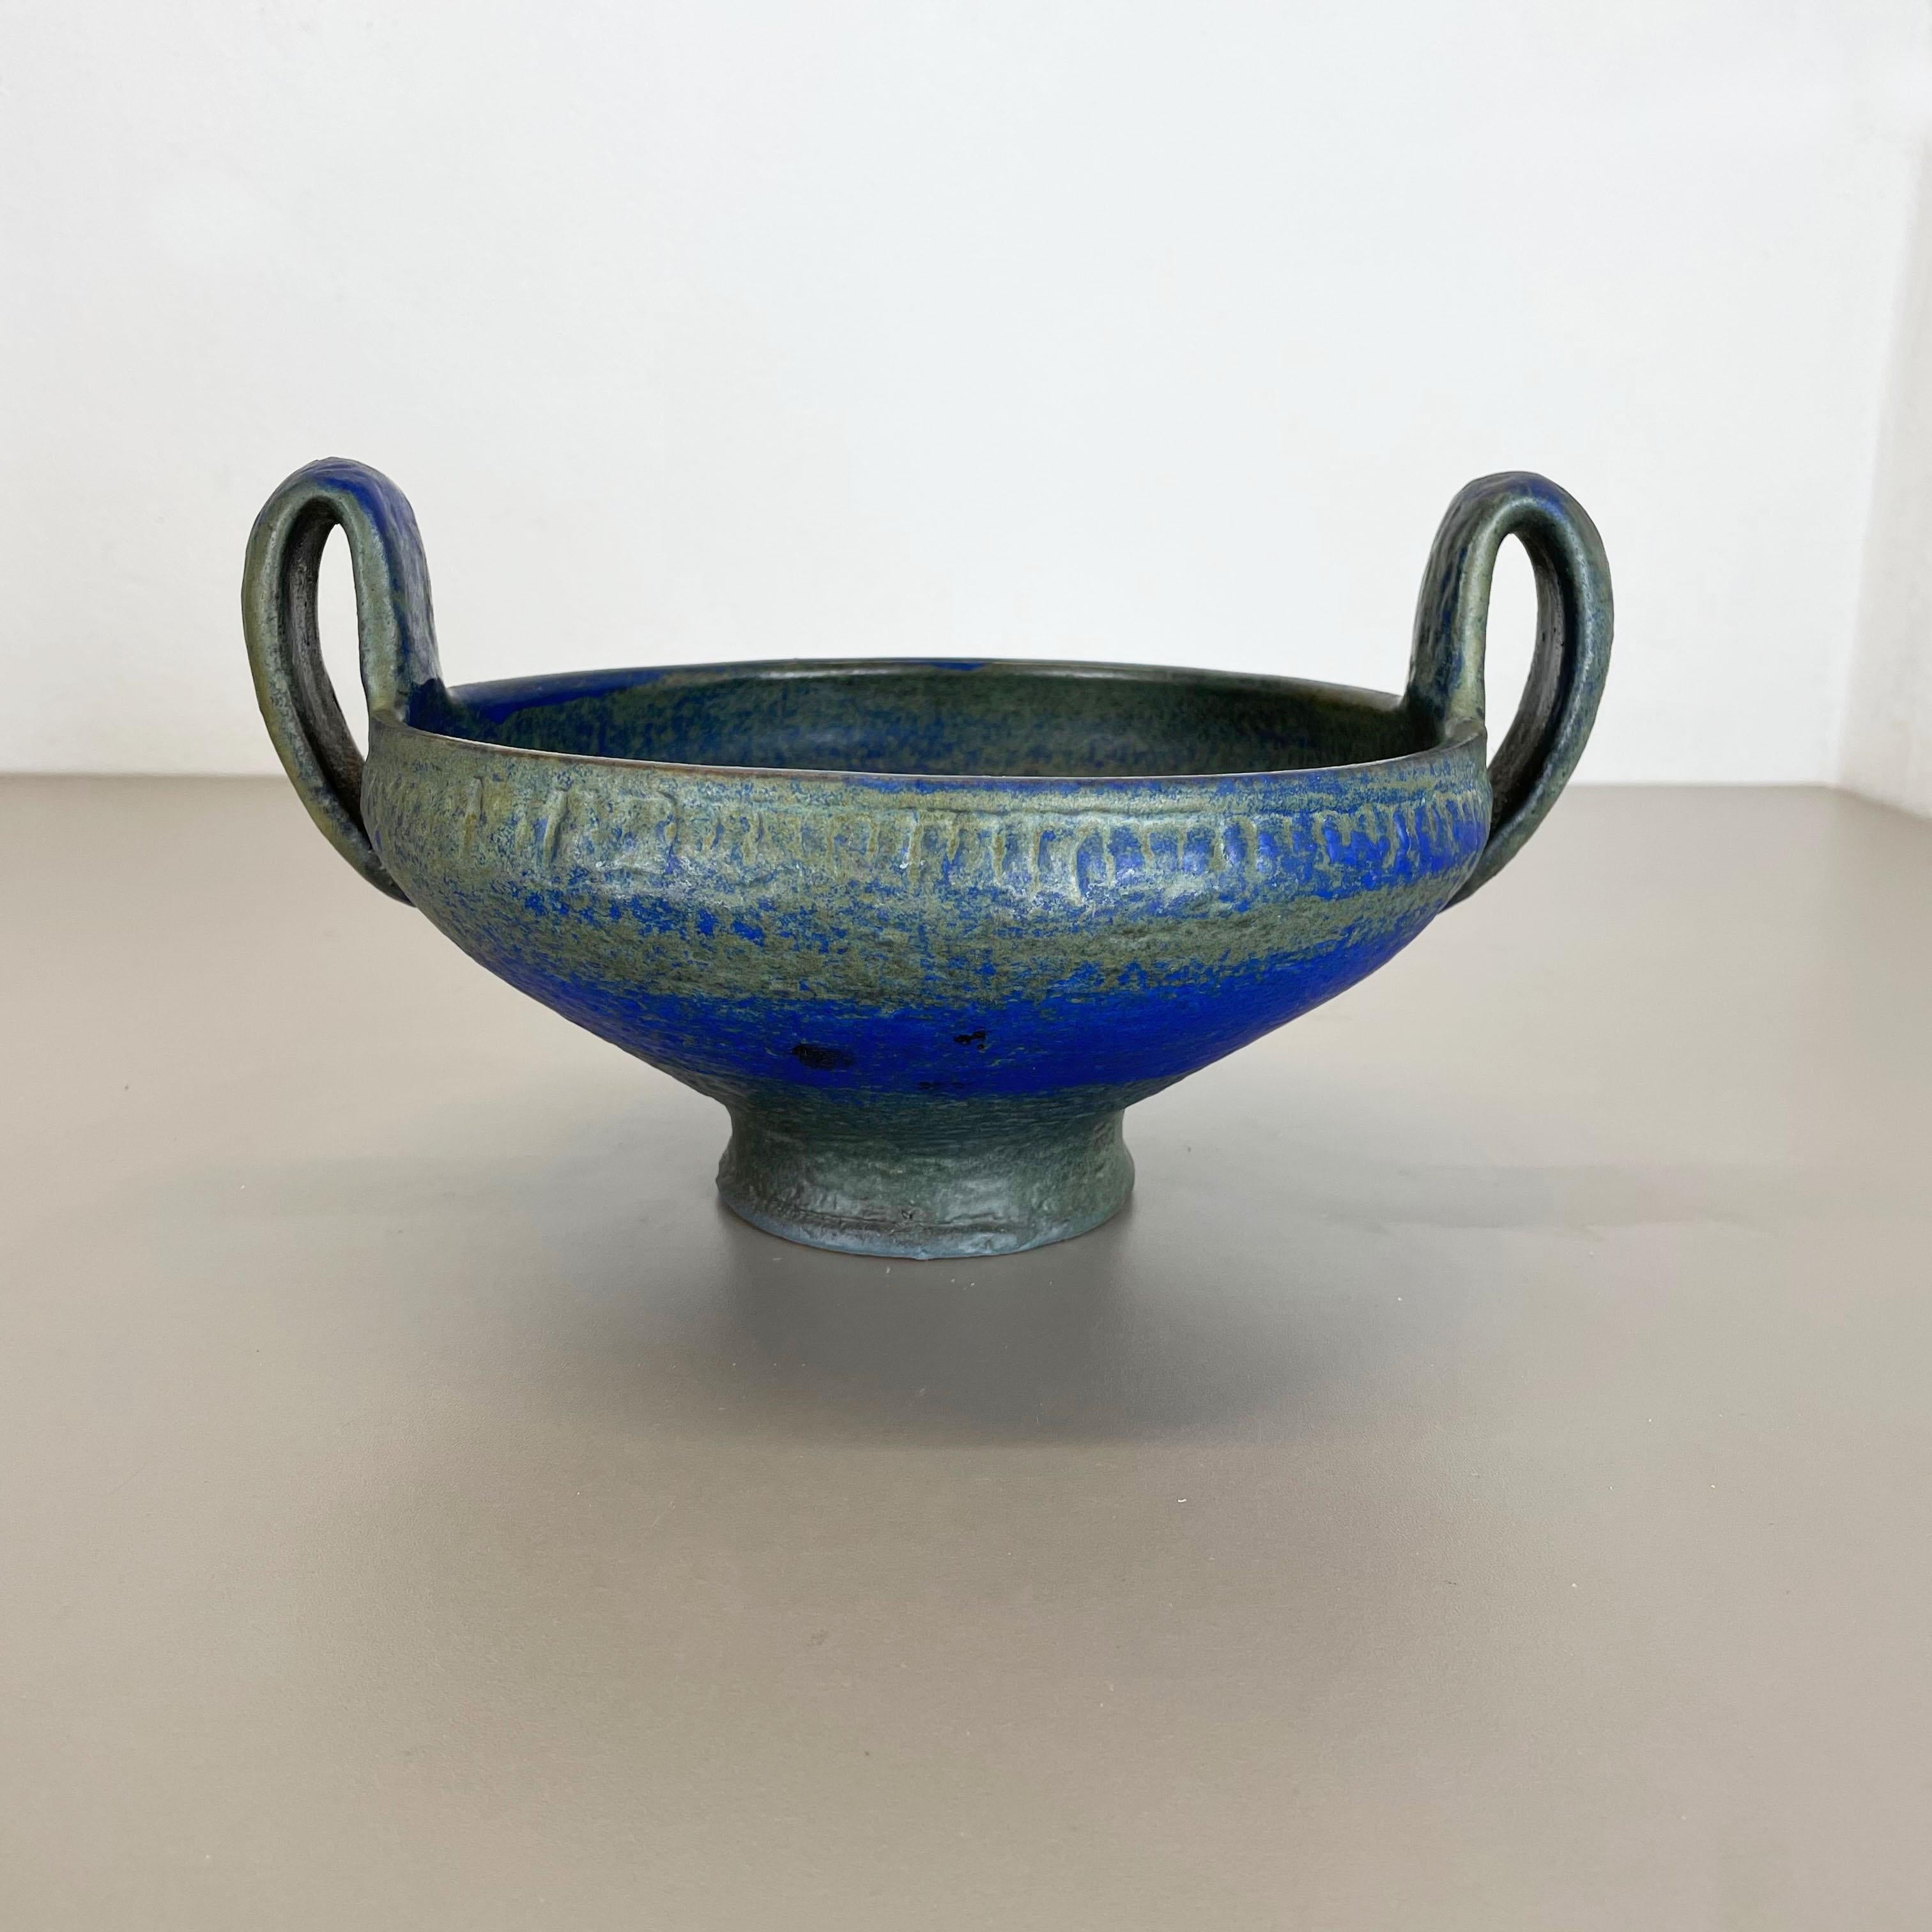 Article:

Pottery ceramic shell bowl element


Producer:

Karlsruher Majolika, Germany


Decade:

1950s





Original vintage 1950s pottery ceramic shell bowl in Germany. High quality German production with a nice strong blue and